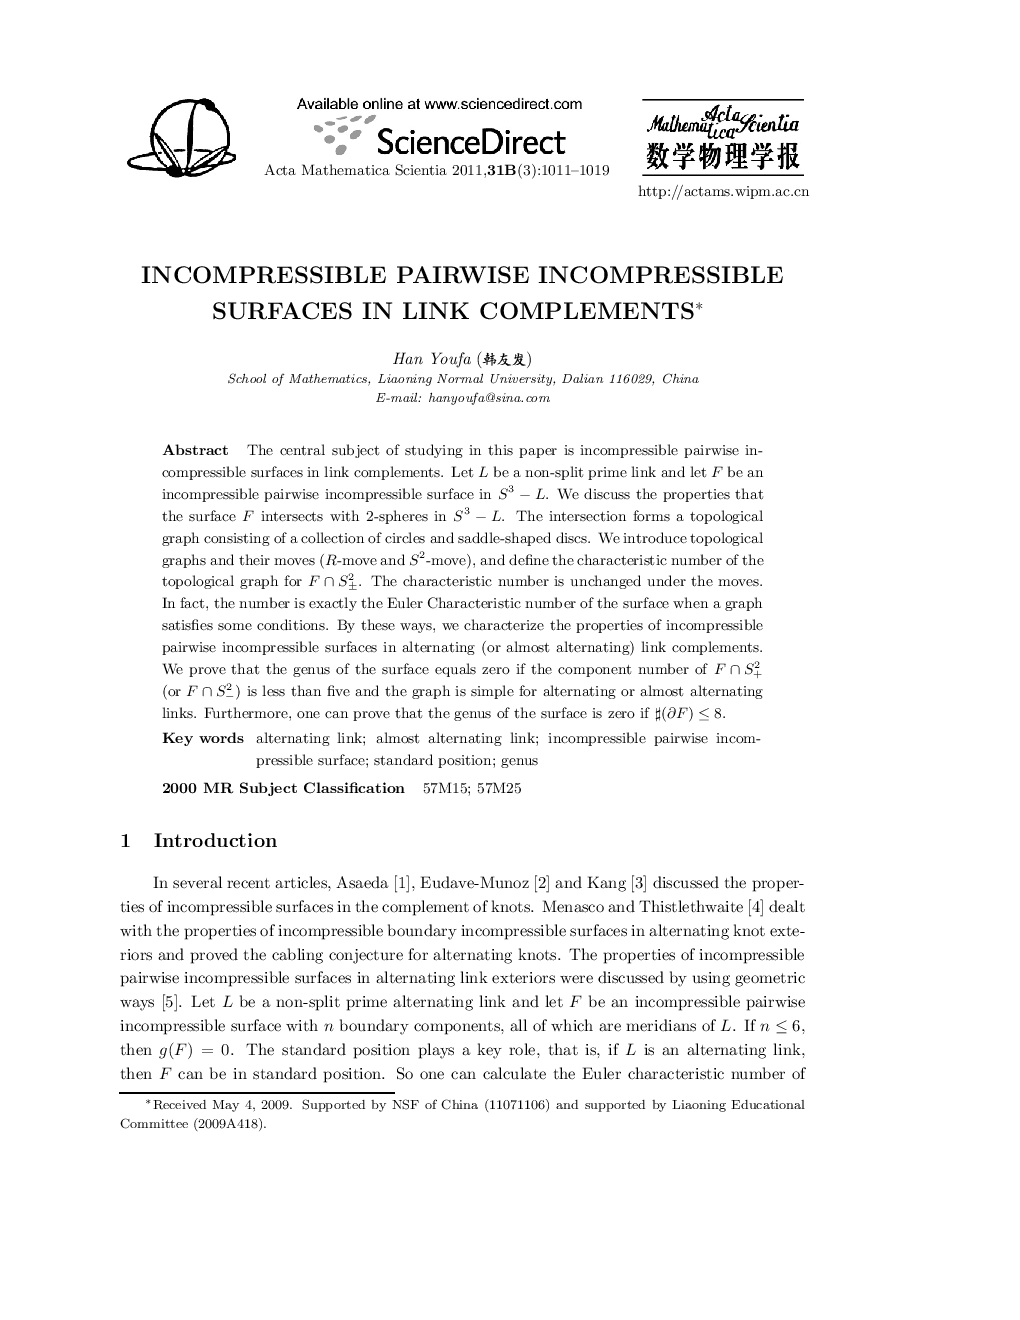 Incompressible pairwise incompressible surfaces in link complements 